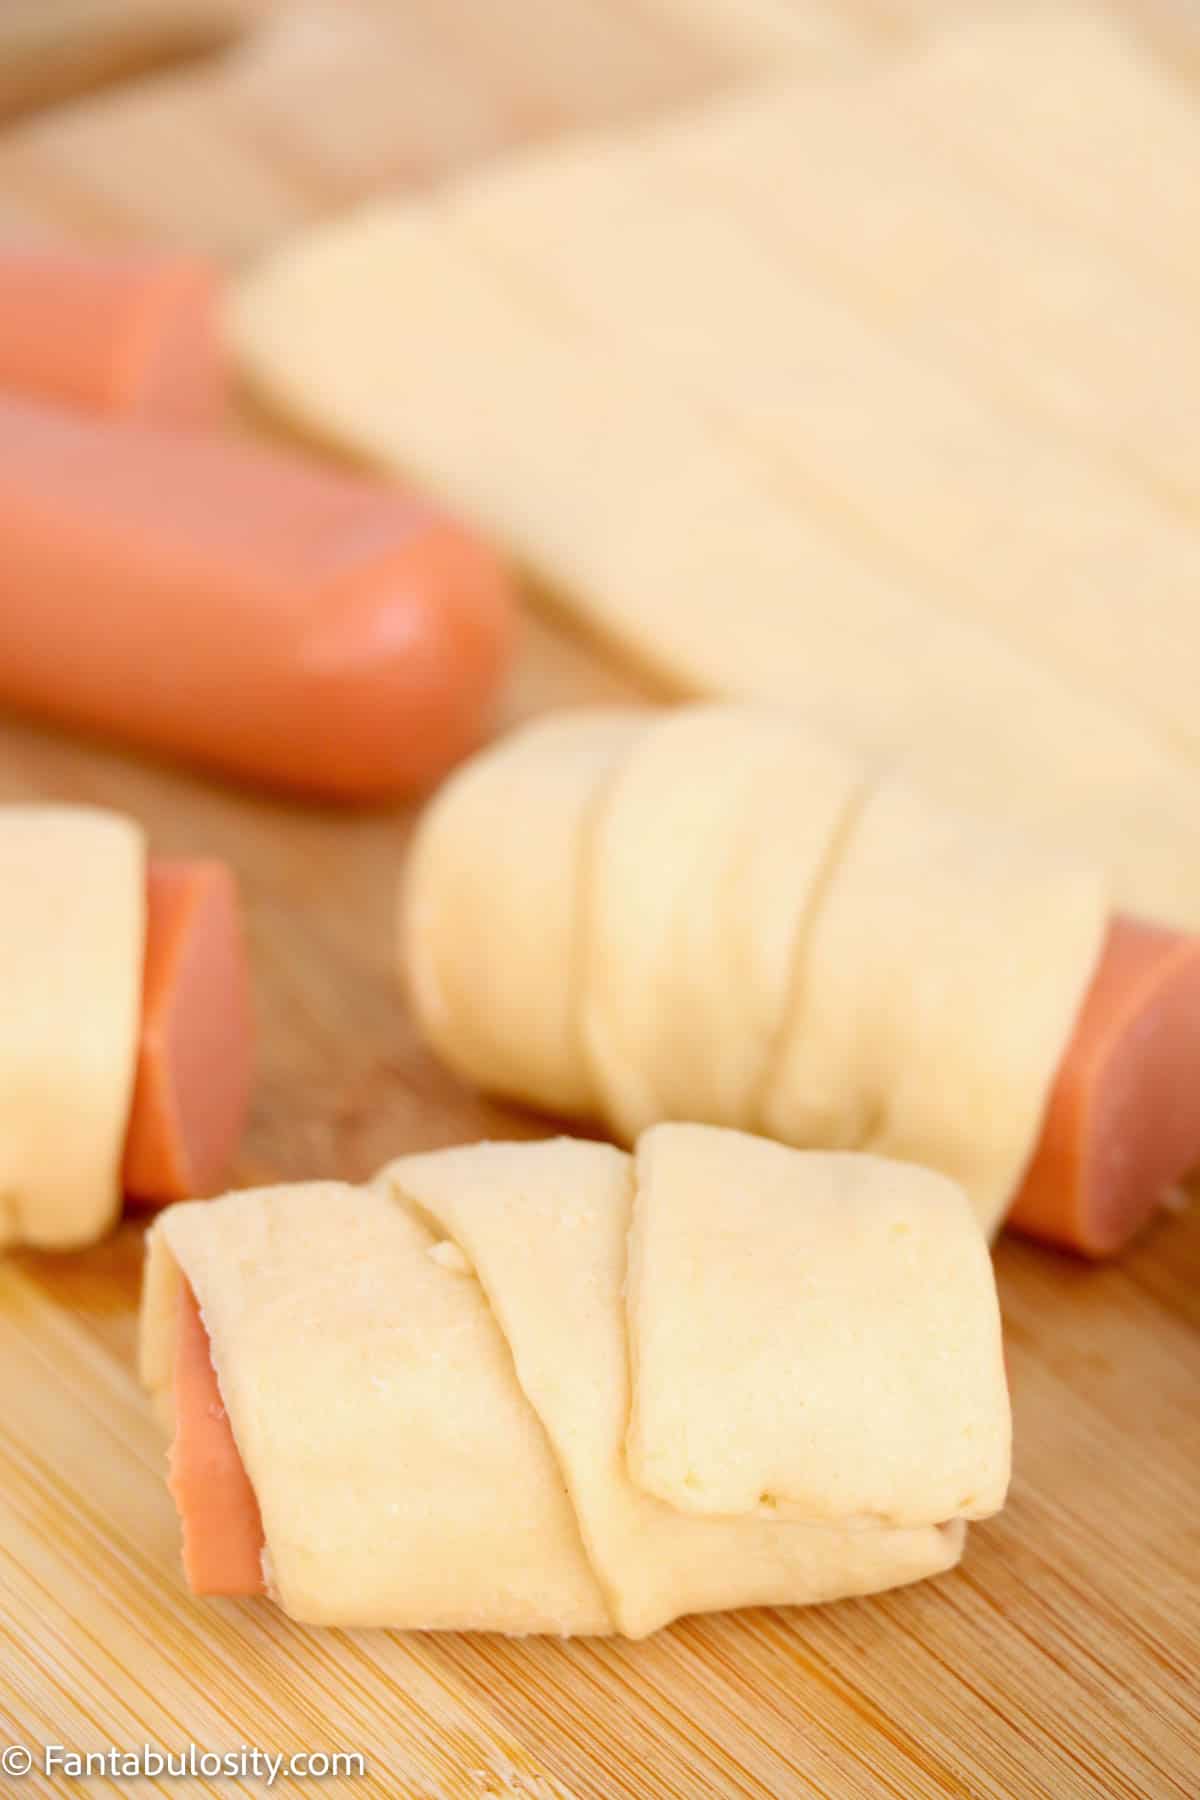 Hot dogs, cut in half and wrapped in a strip of crescent dough.